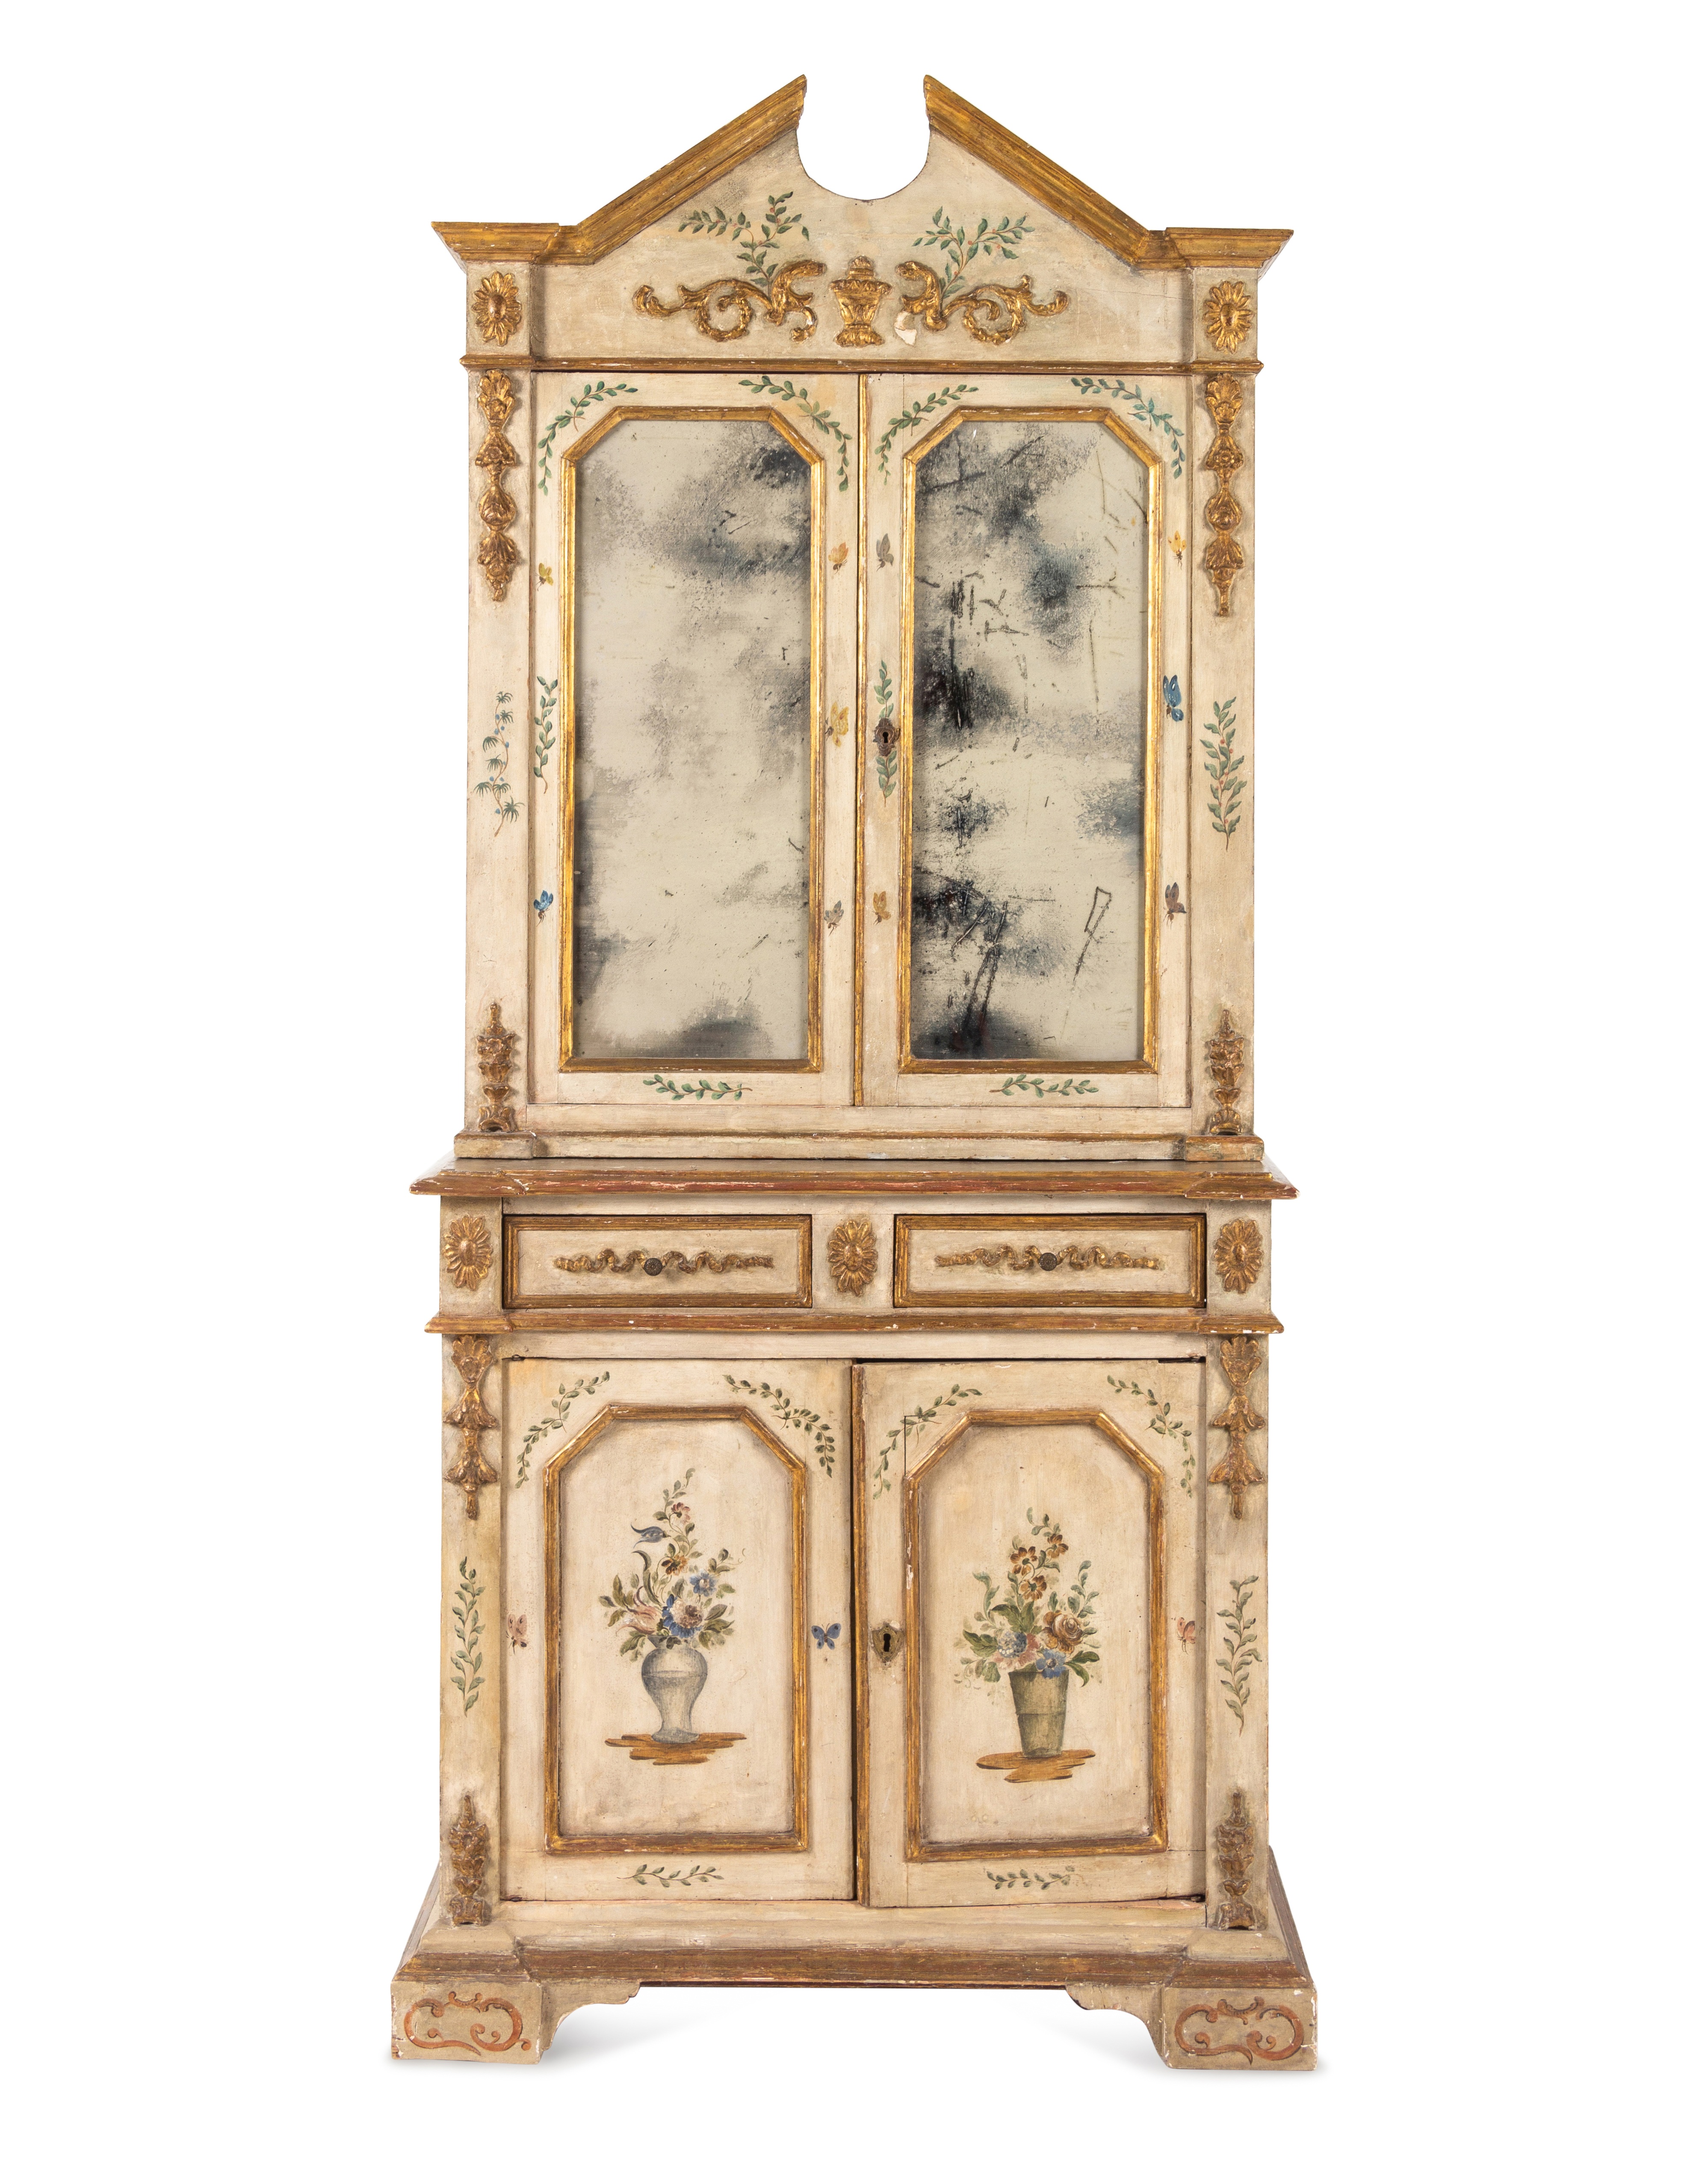 An Italian Polychrome and Cream-Painted and Parcel-Gilt Cabinet